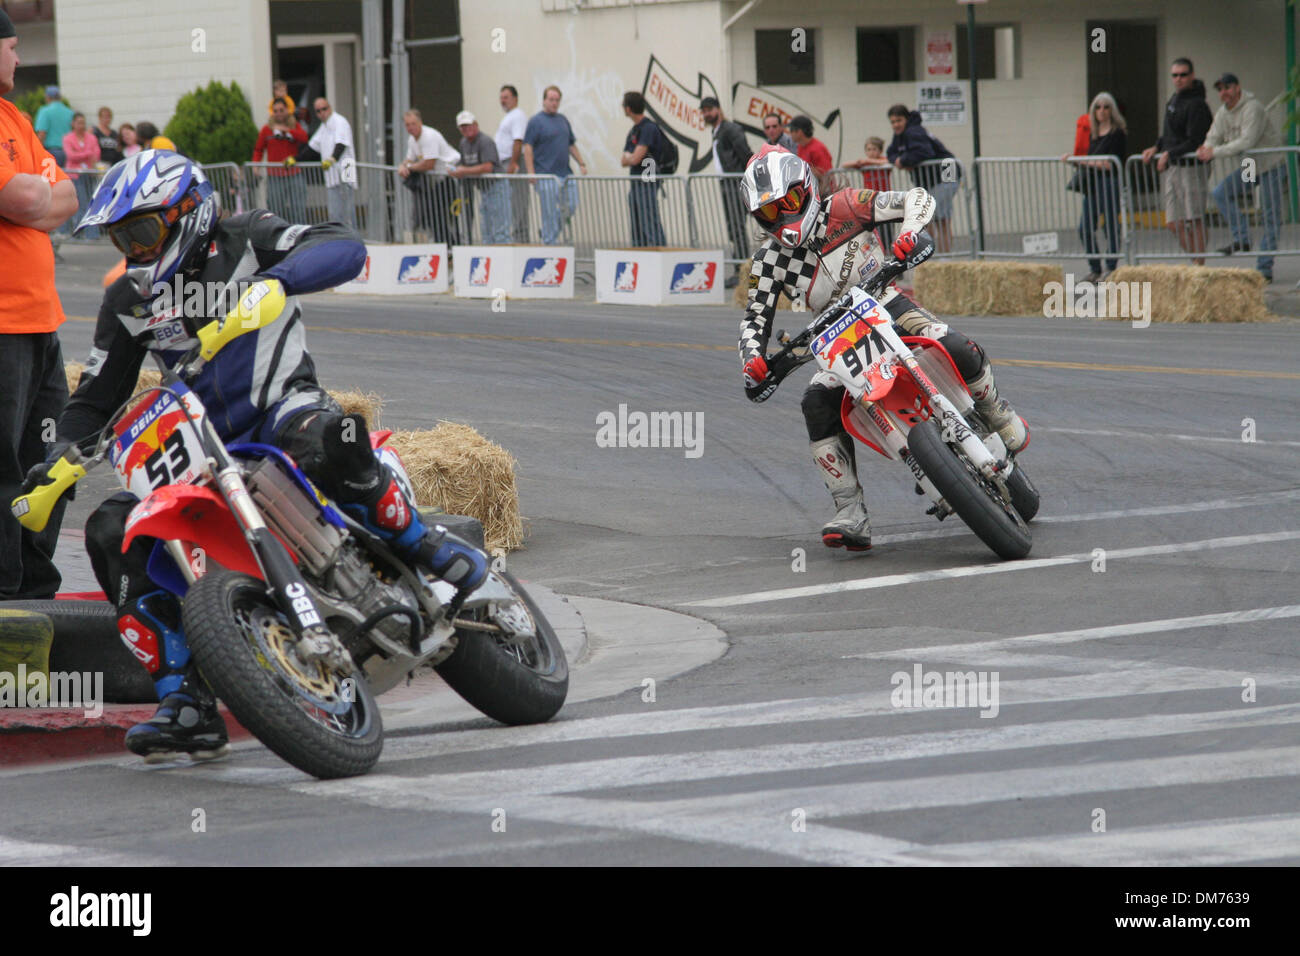 Oct 01, 2005; Reno, NV, USA; AMA Red Bull Supermoto A Go-Go held downtown  Reno, Nevada. The urban course was comprised of pavement, dirt & urban  cross sections built around the Circus